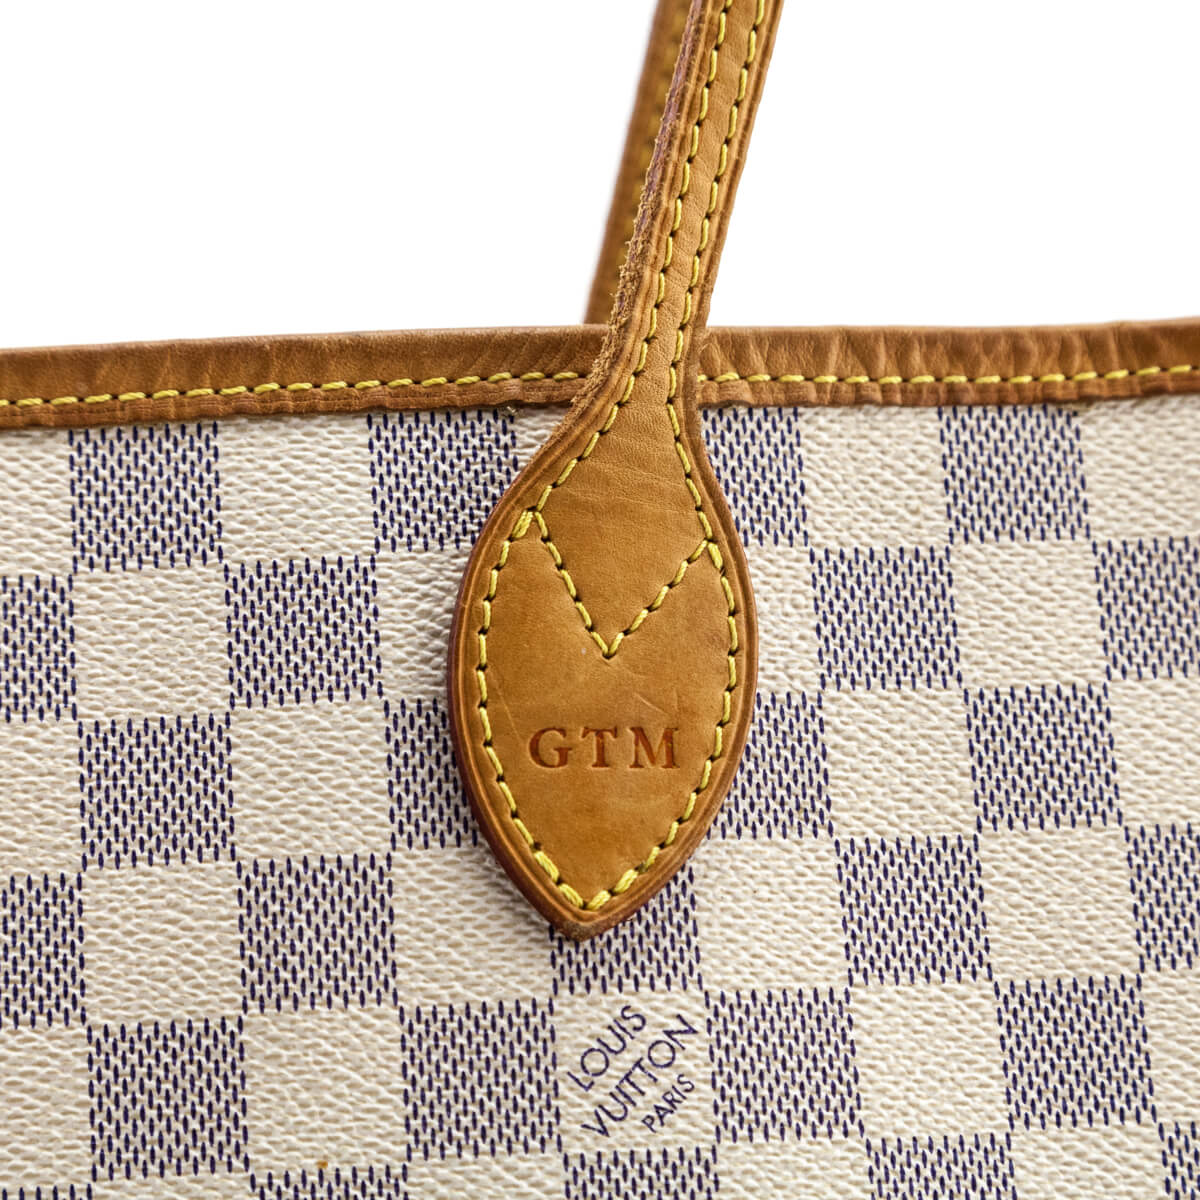 Preloved Louis Vuitton Damier Azur Neverfull Large Pouch with Beige Interior SF4175 082323